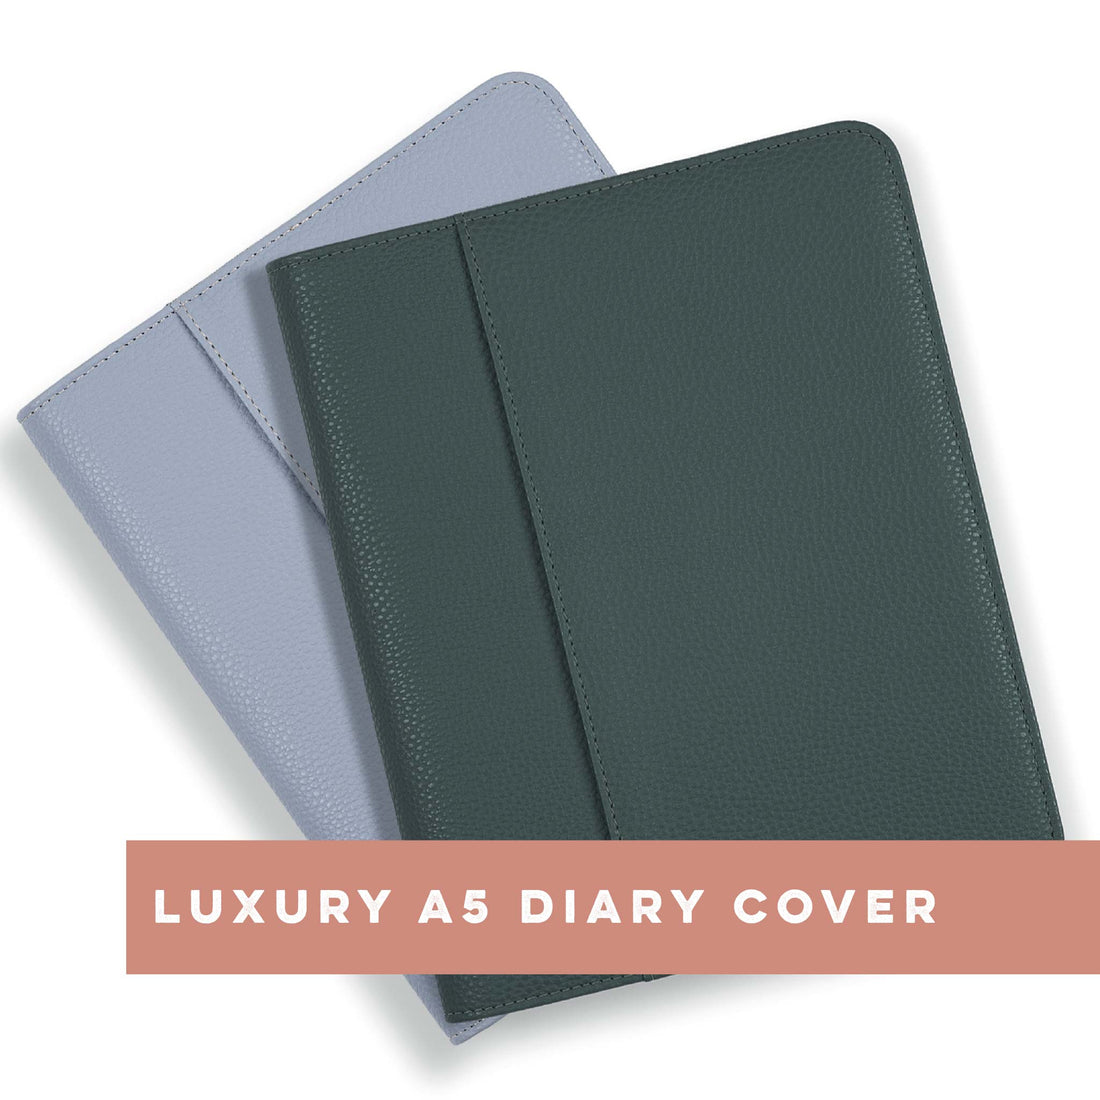 Luxury A5 Diary Cover